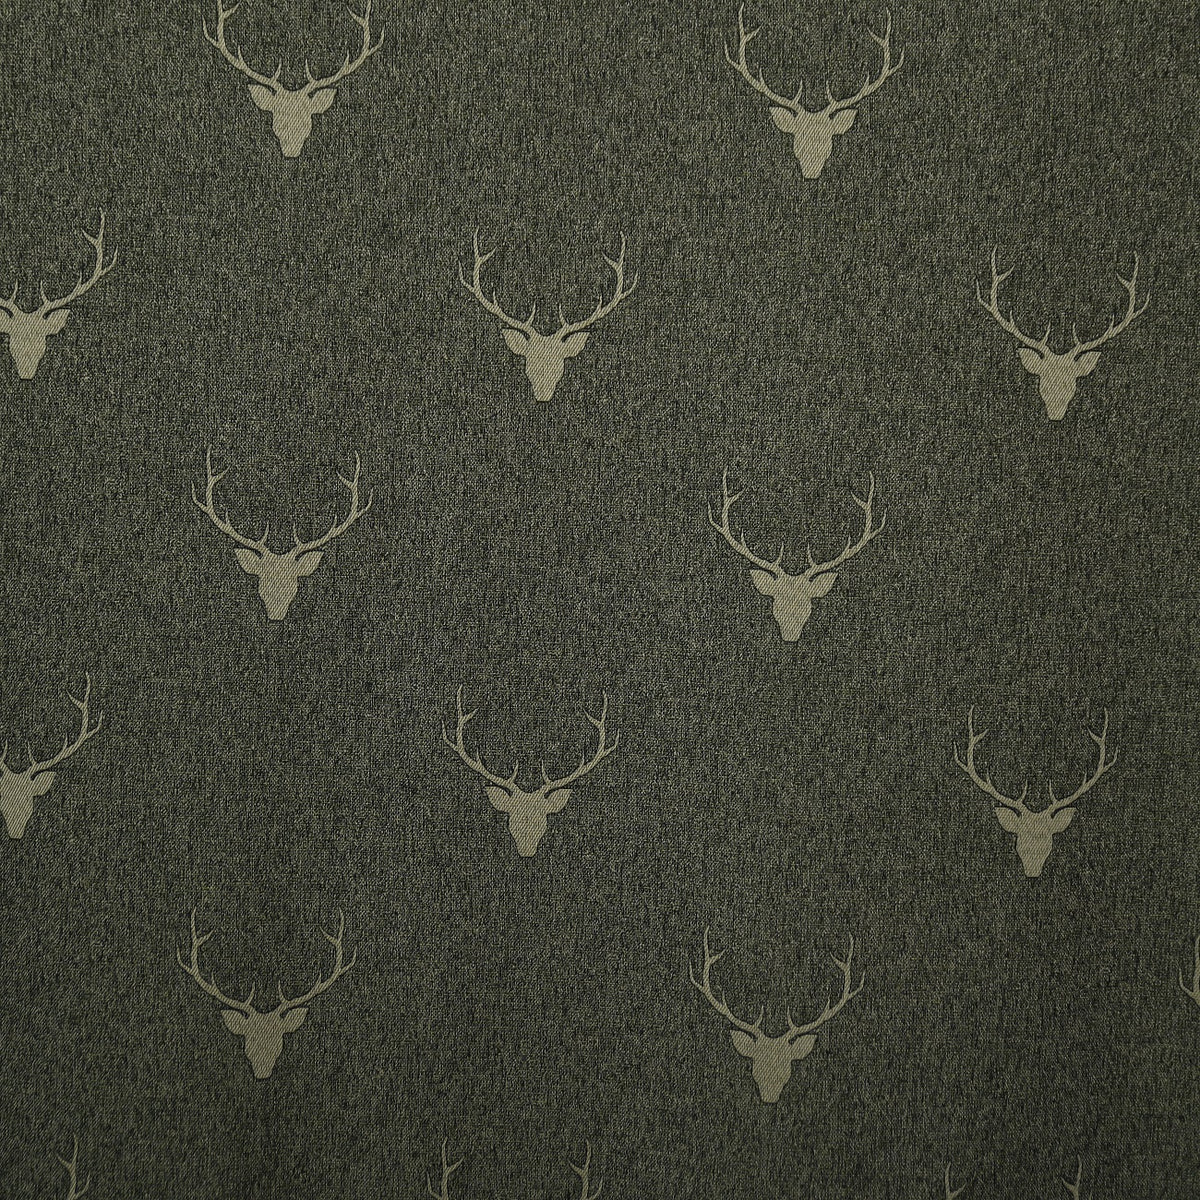 Night curtain green stag jump